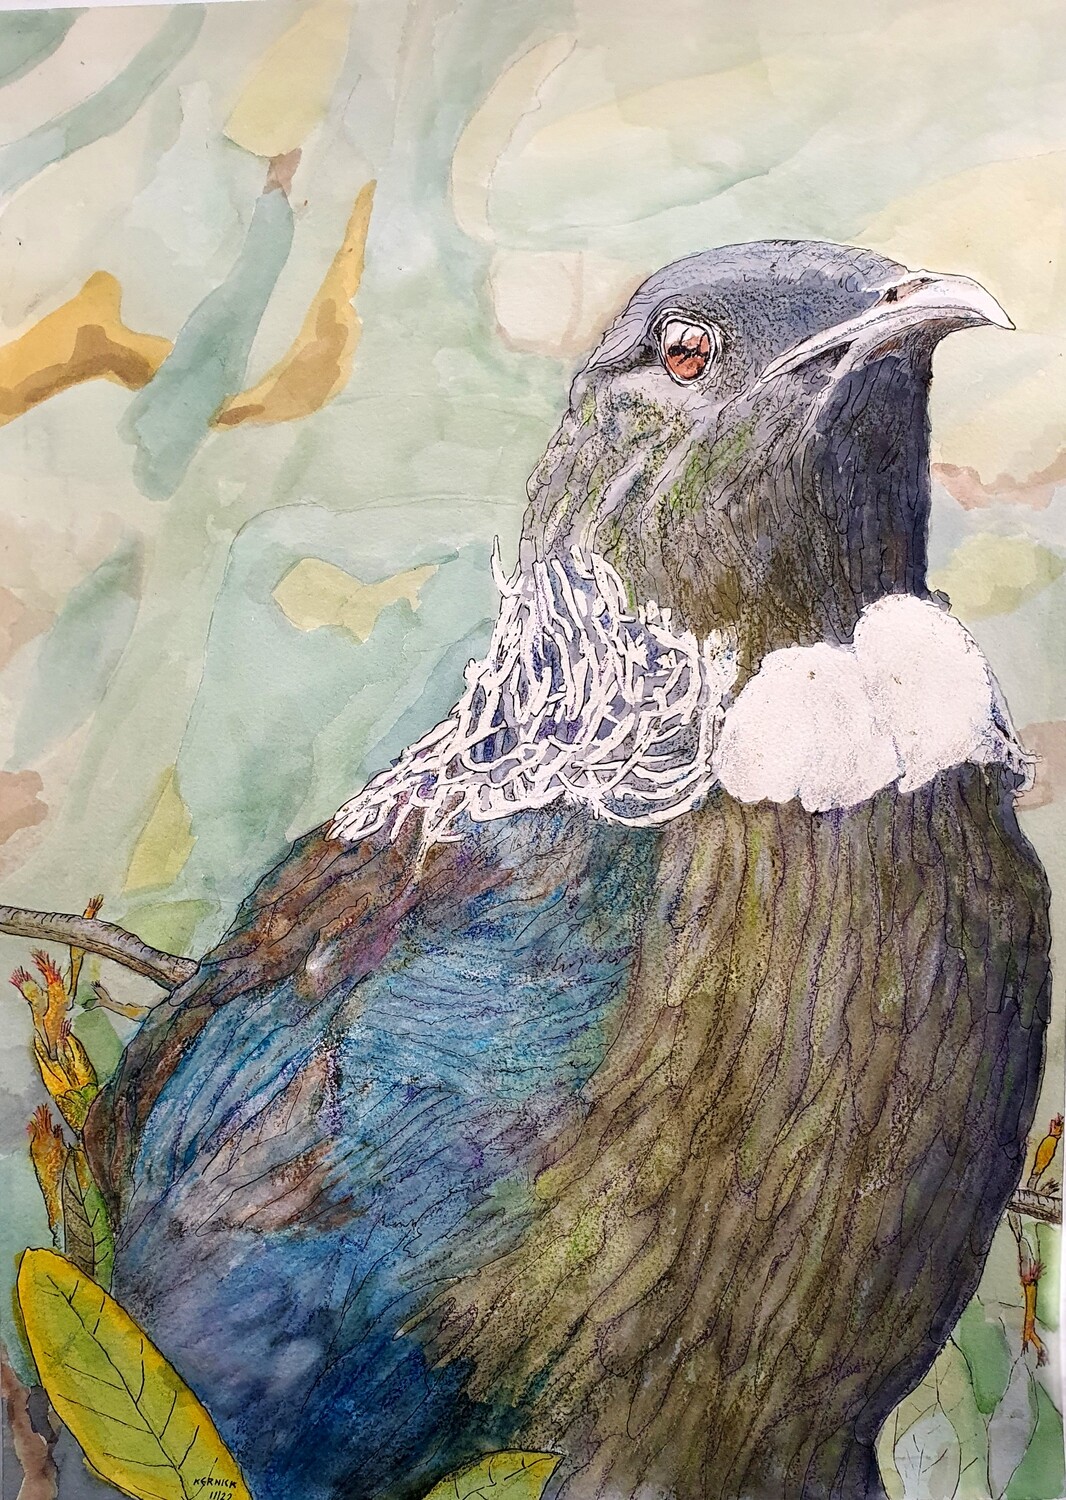 Special Introductory High Quality Print of "Homage to the Tui"